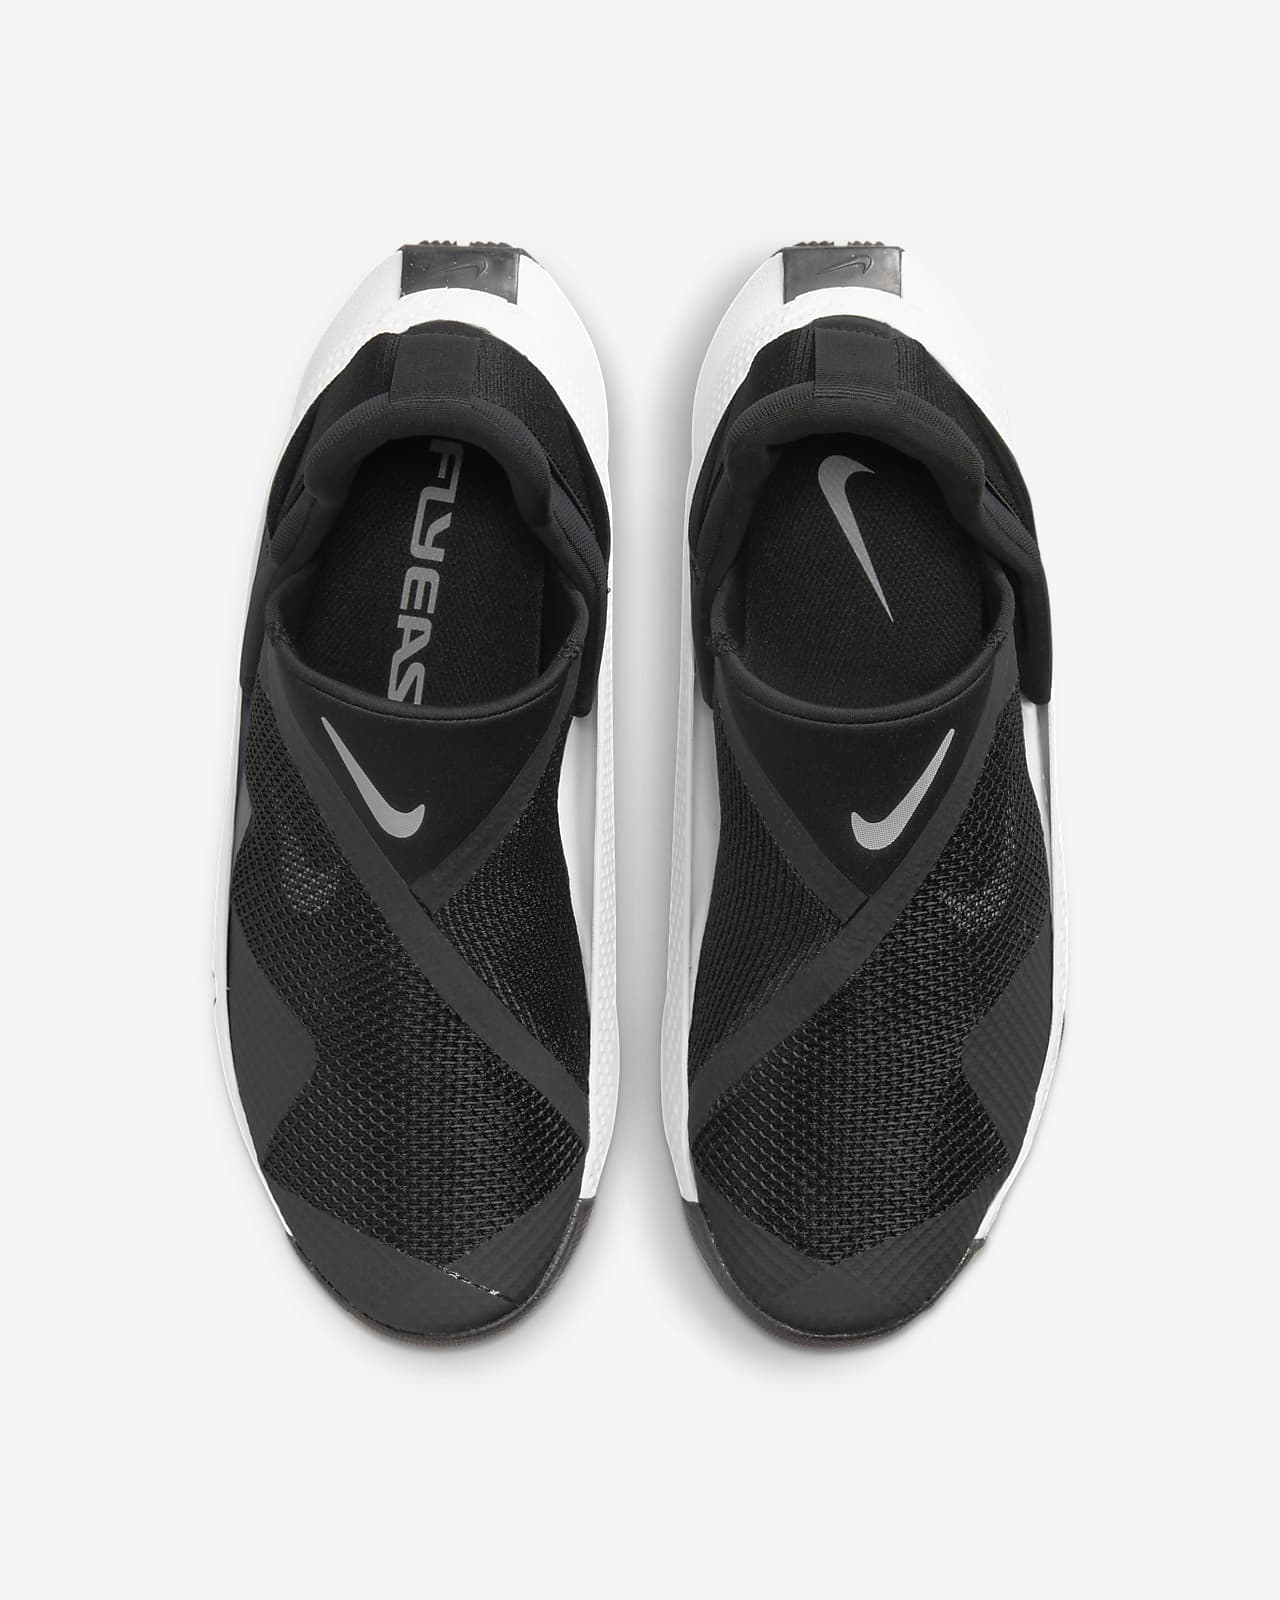 The New Nike GO FlyEase Trainers Are Slip-On, Hands-Free & Laceless